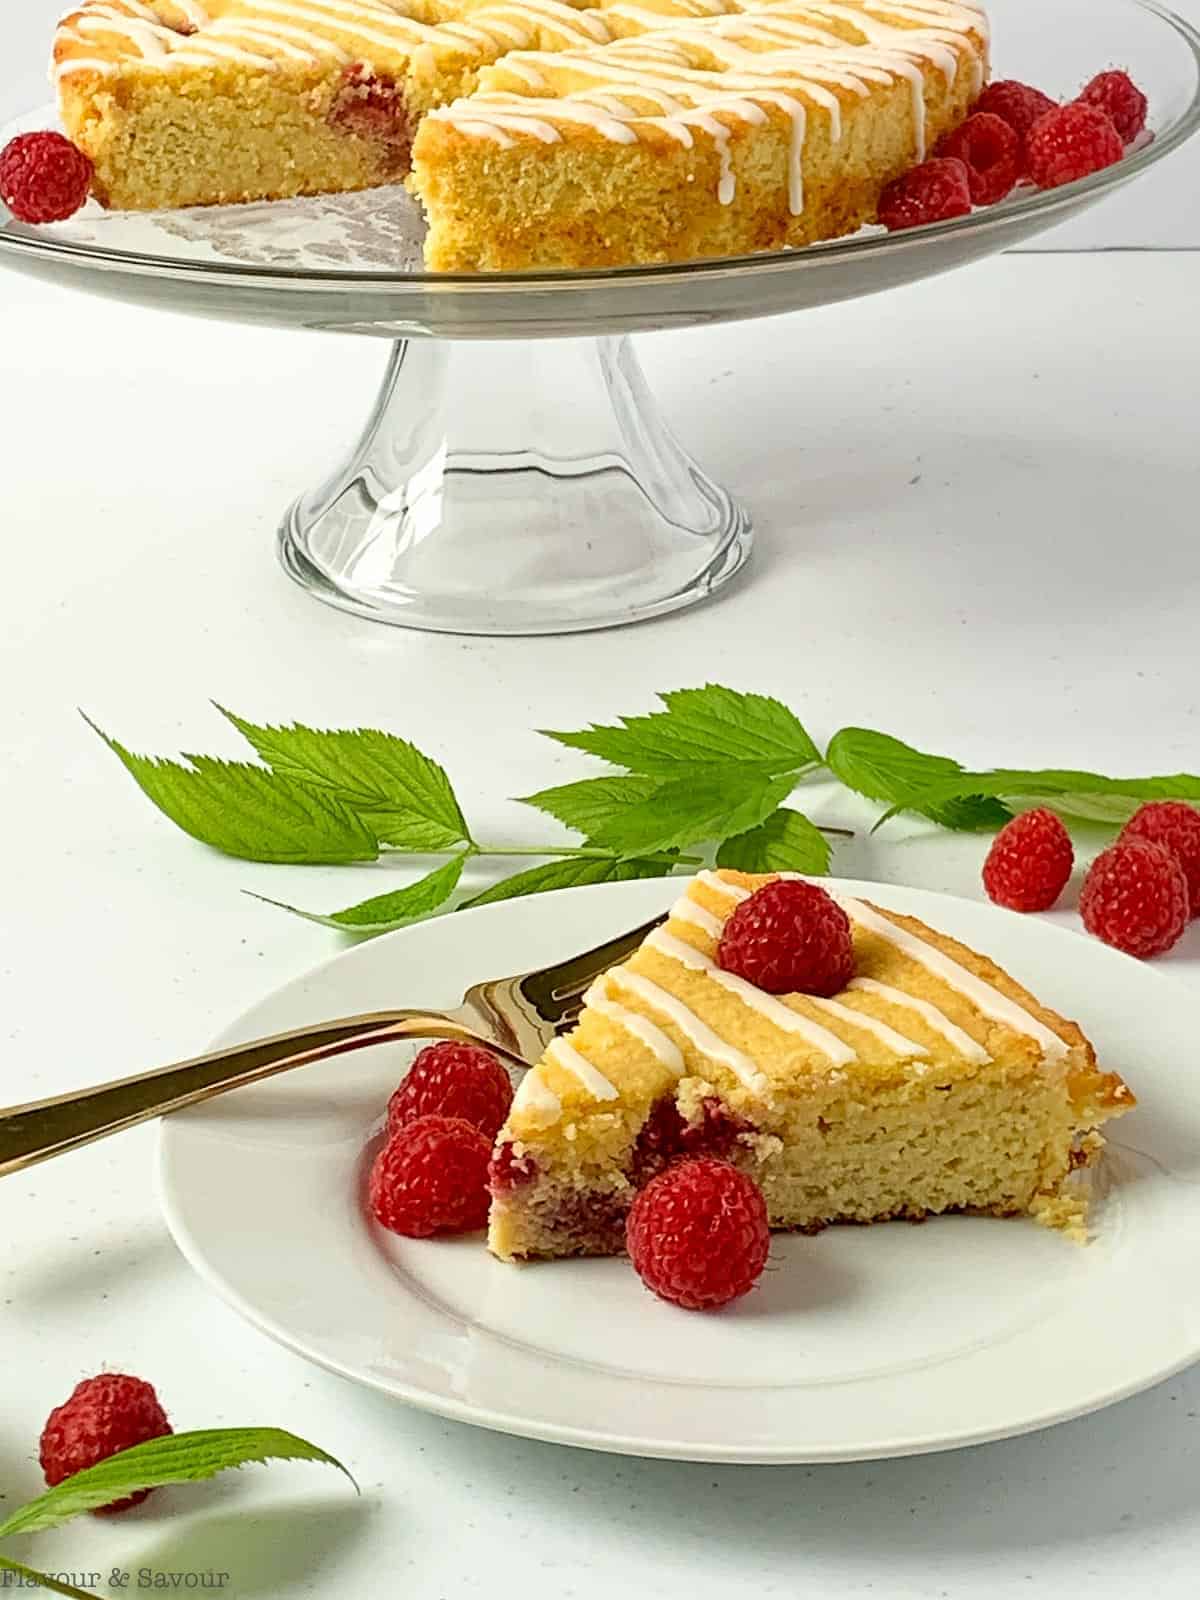 A slice of Raspberry Lemon Ricotta Cake on a white plate with the cake on a glass pedestal stand behind.